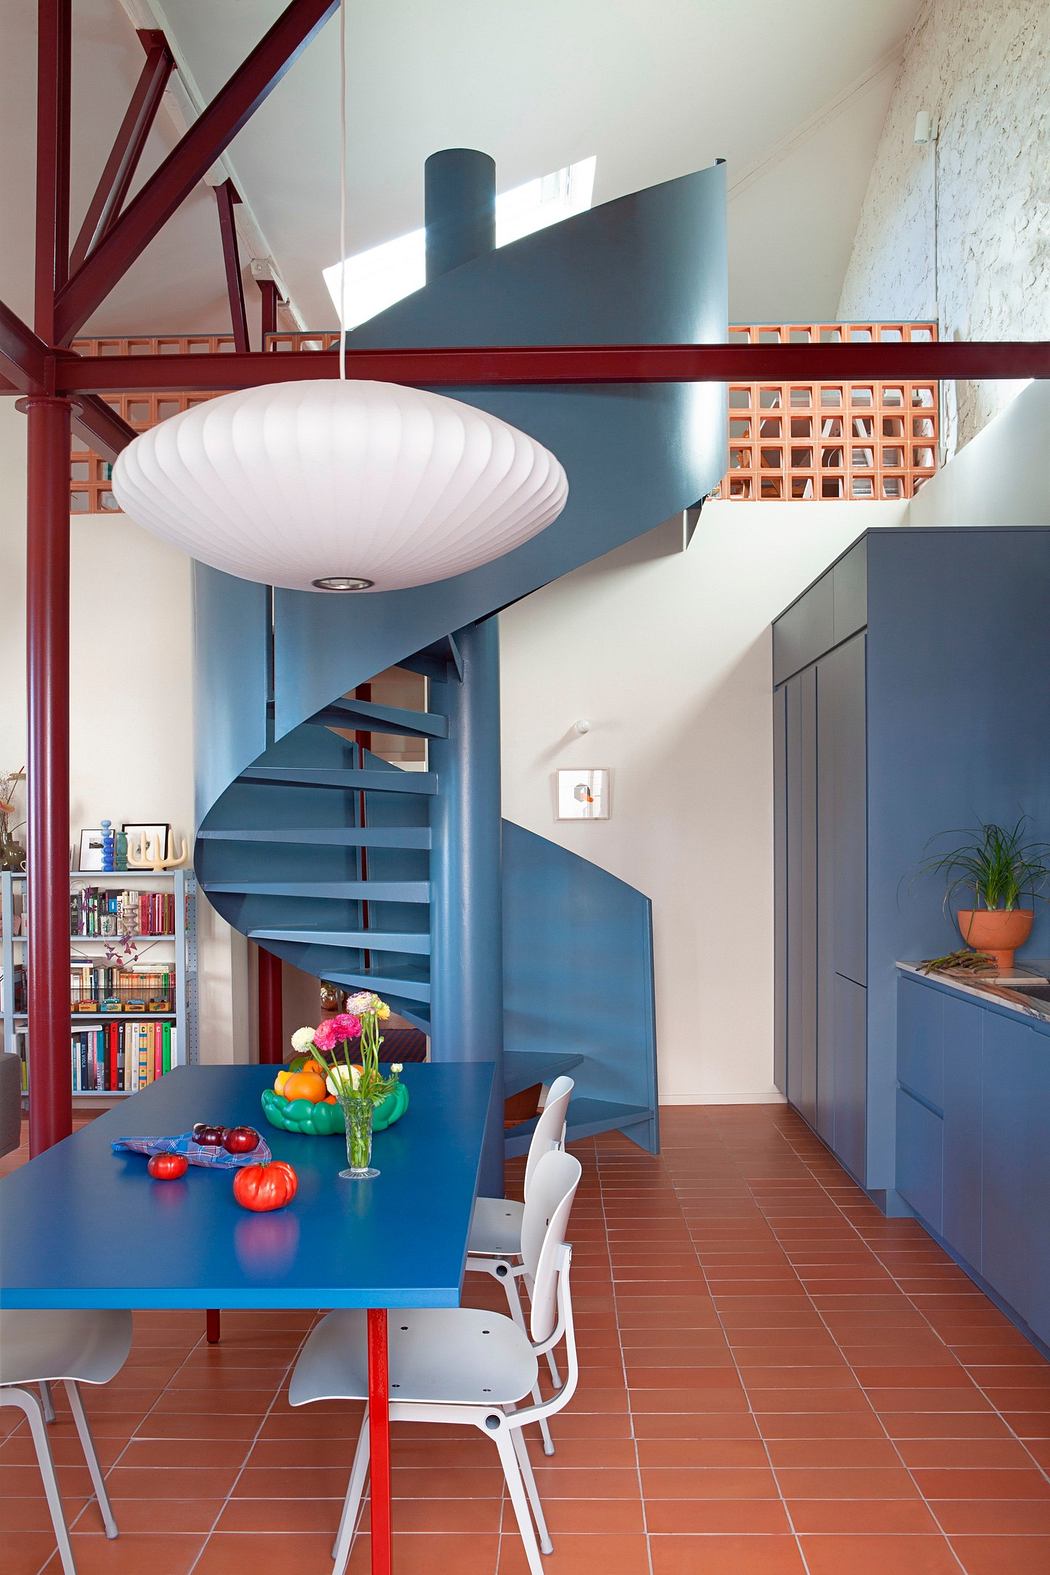 Modern interior with blue spiral staircase, terracotta floor tiles, and red structural